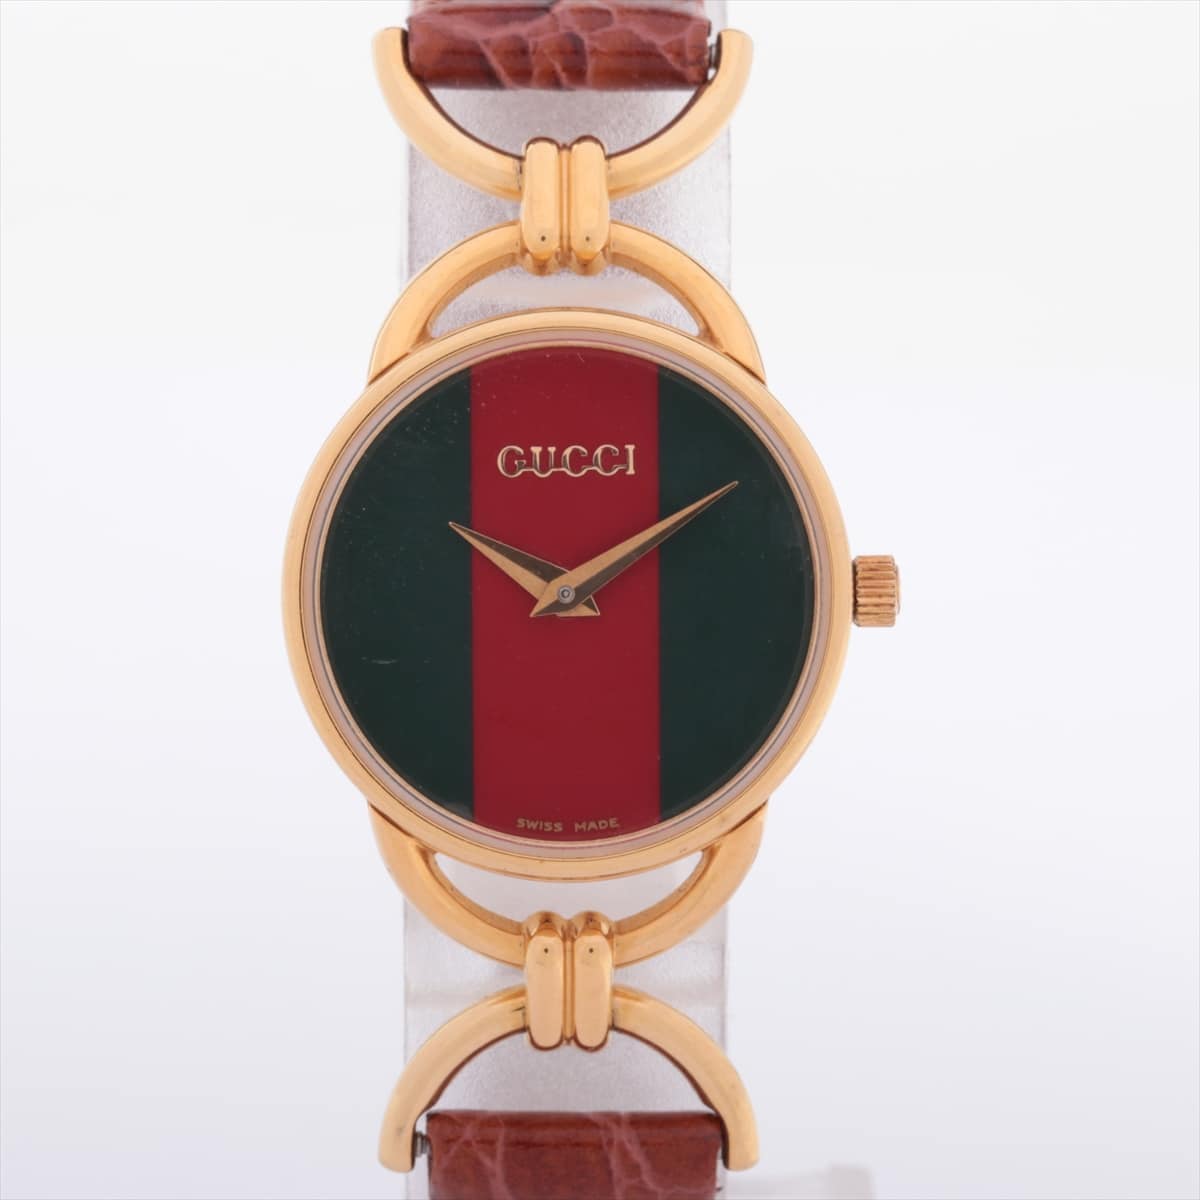 Gucci Sherry Line 6000.2.L GP & Leather QZ Multi dial Inner box only